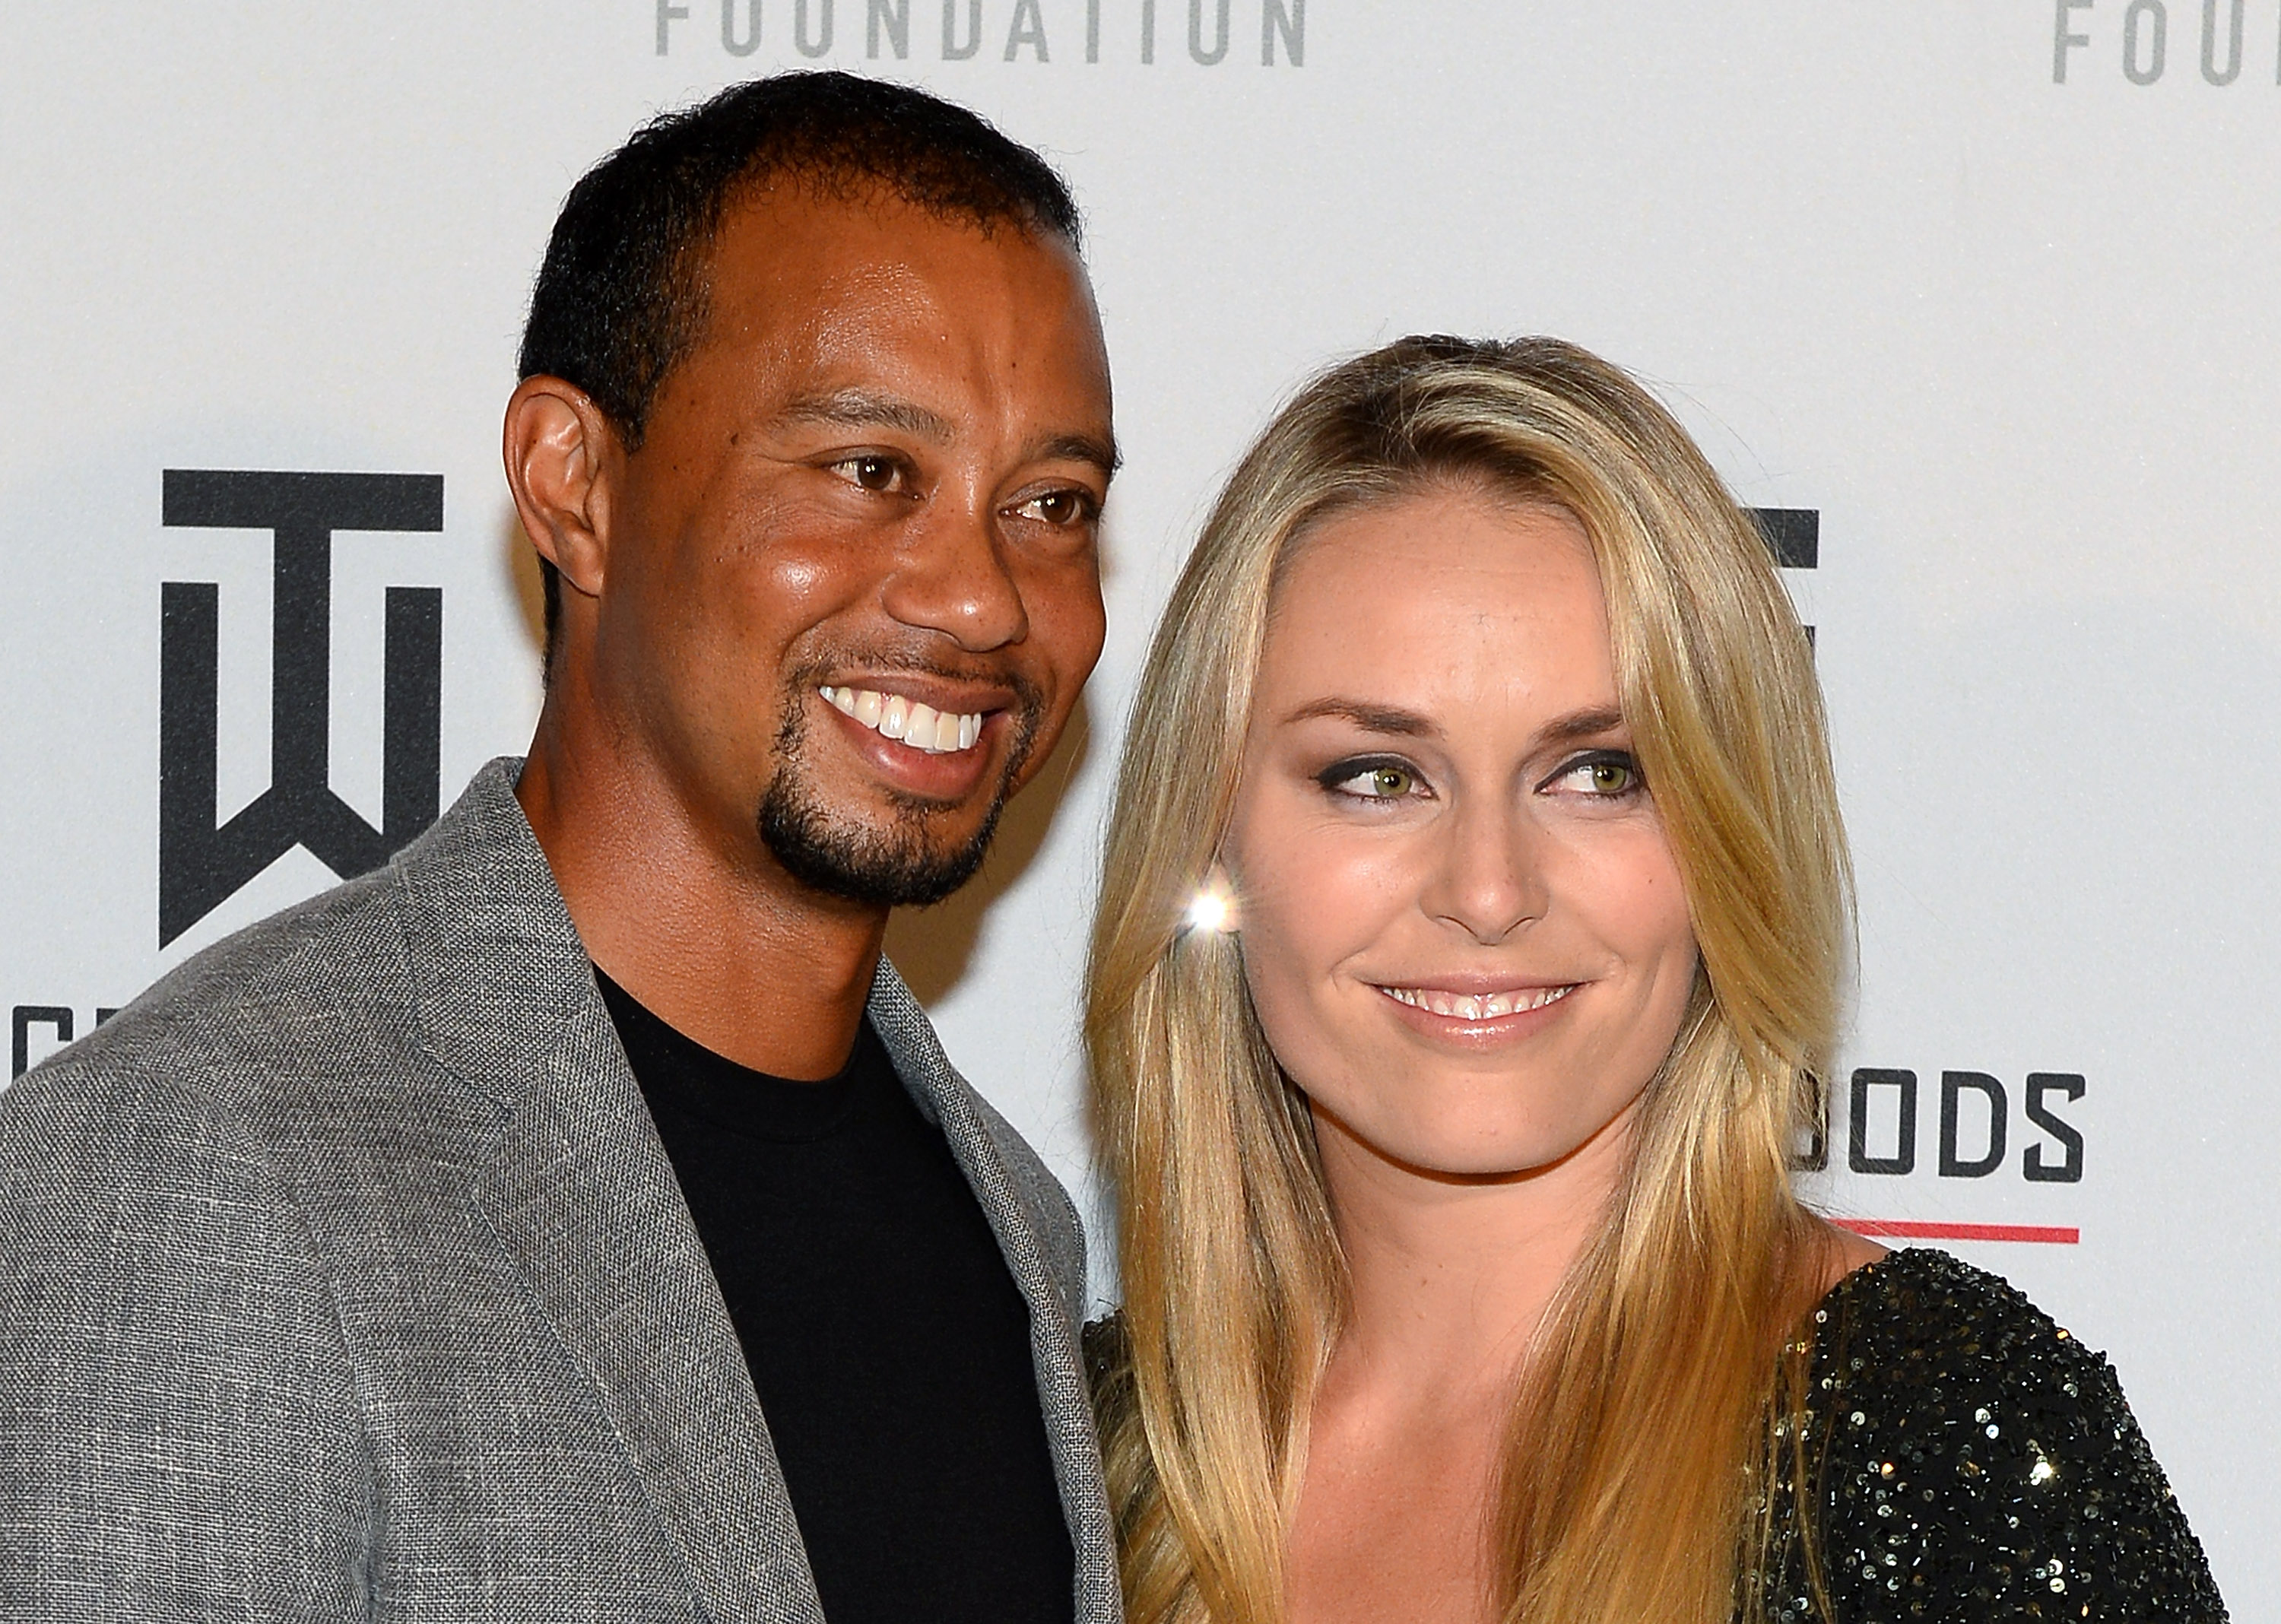 Tiger's ex girlfriend: I wish he would have listened to me a little more